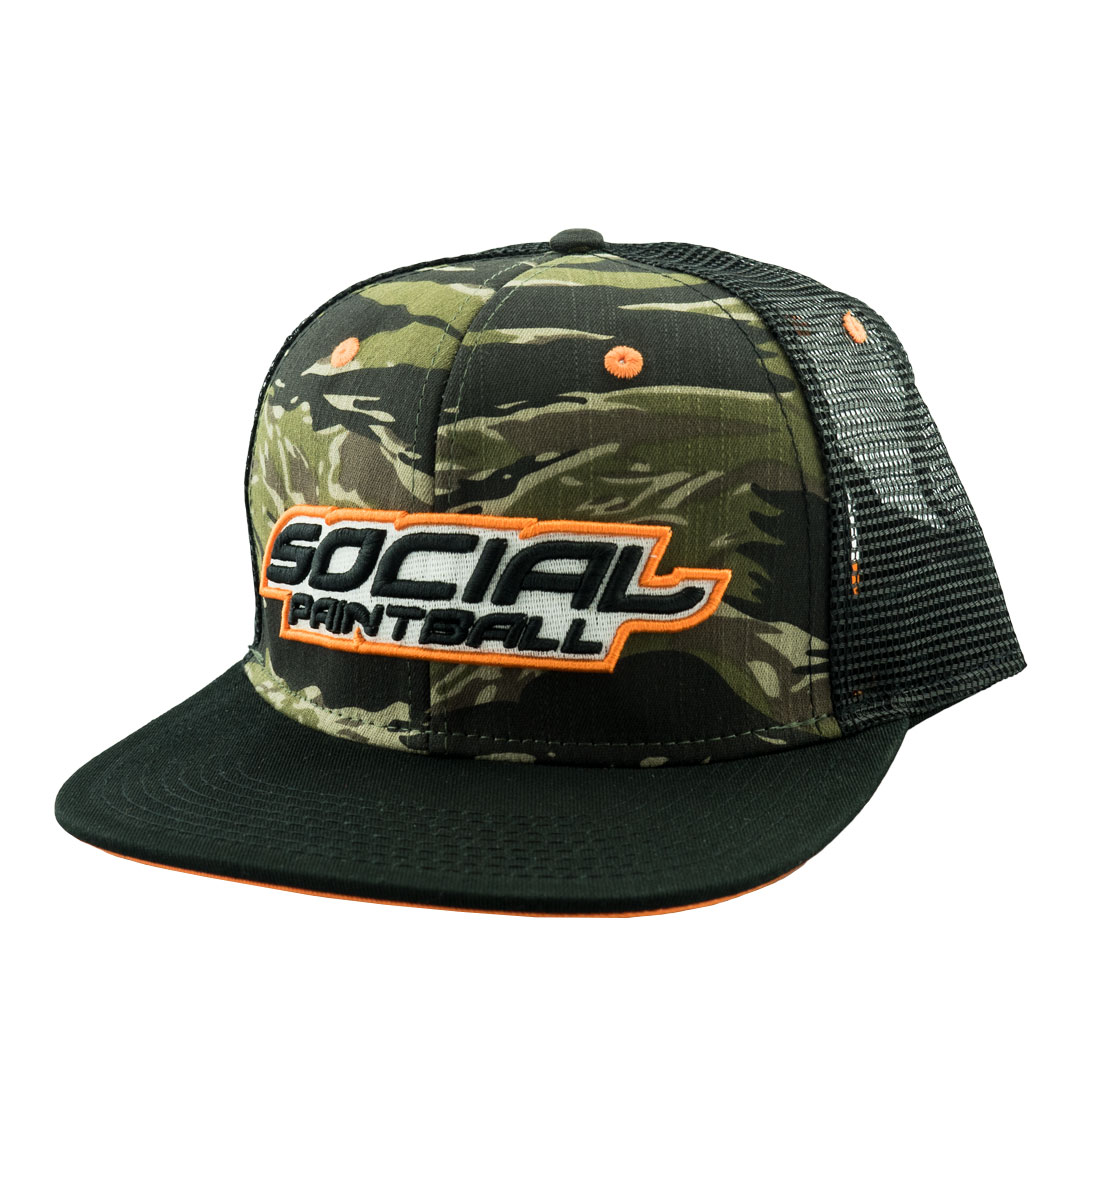 Details about   Social Paintball Snapback Hat Adjustable Mossy Oak Break-Up Country Camo NEW 